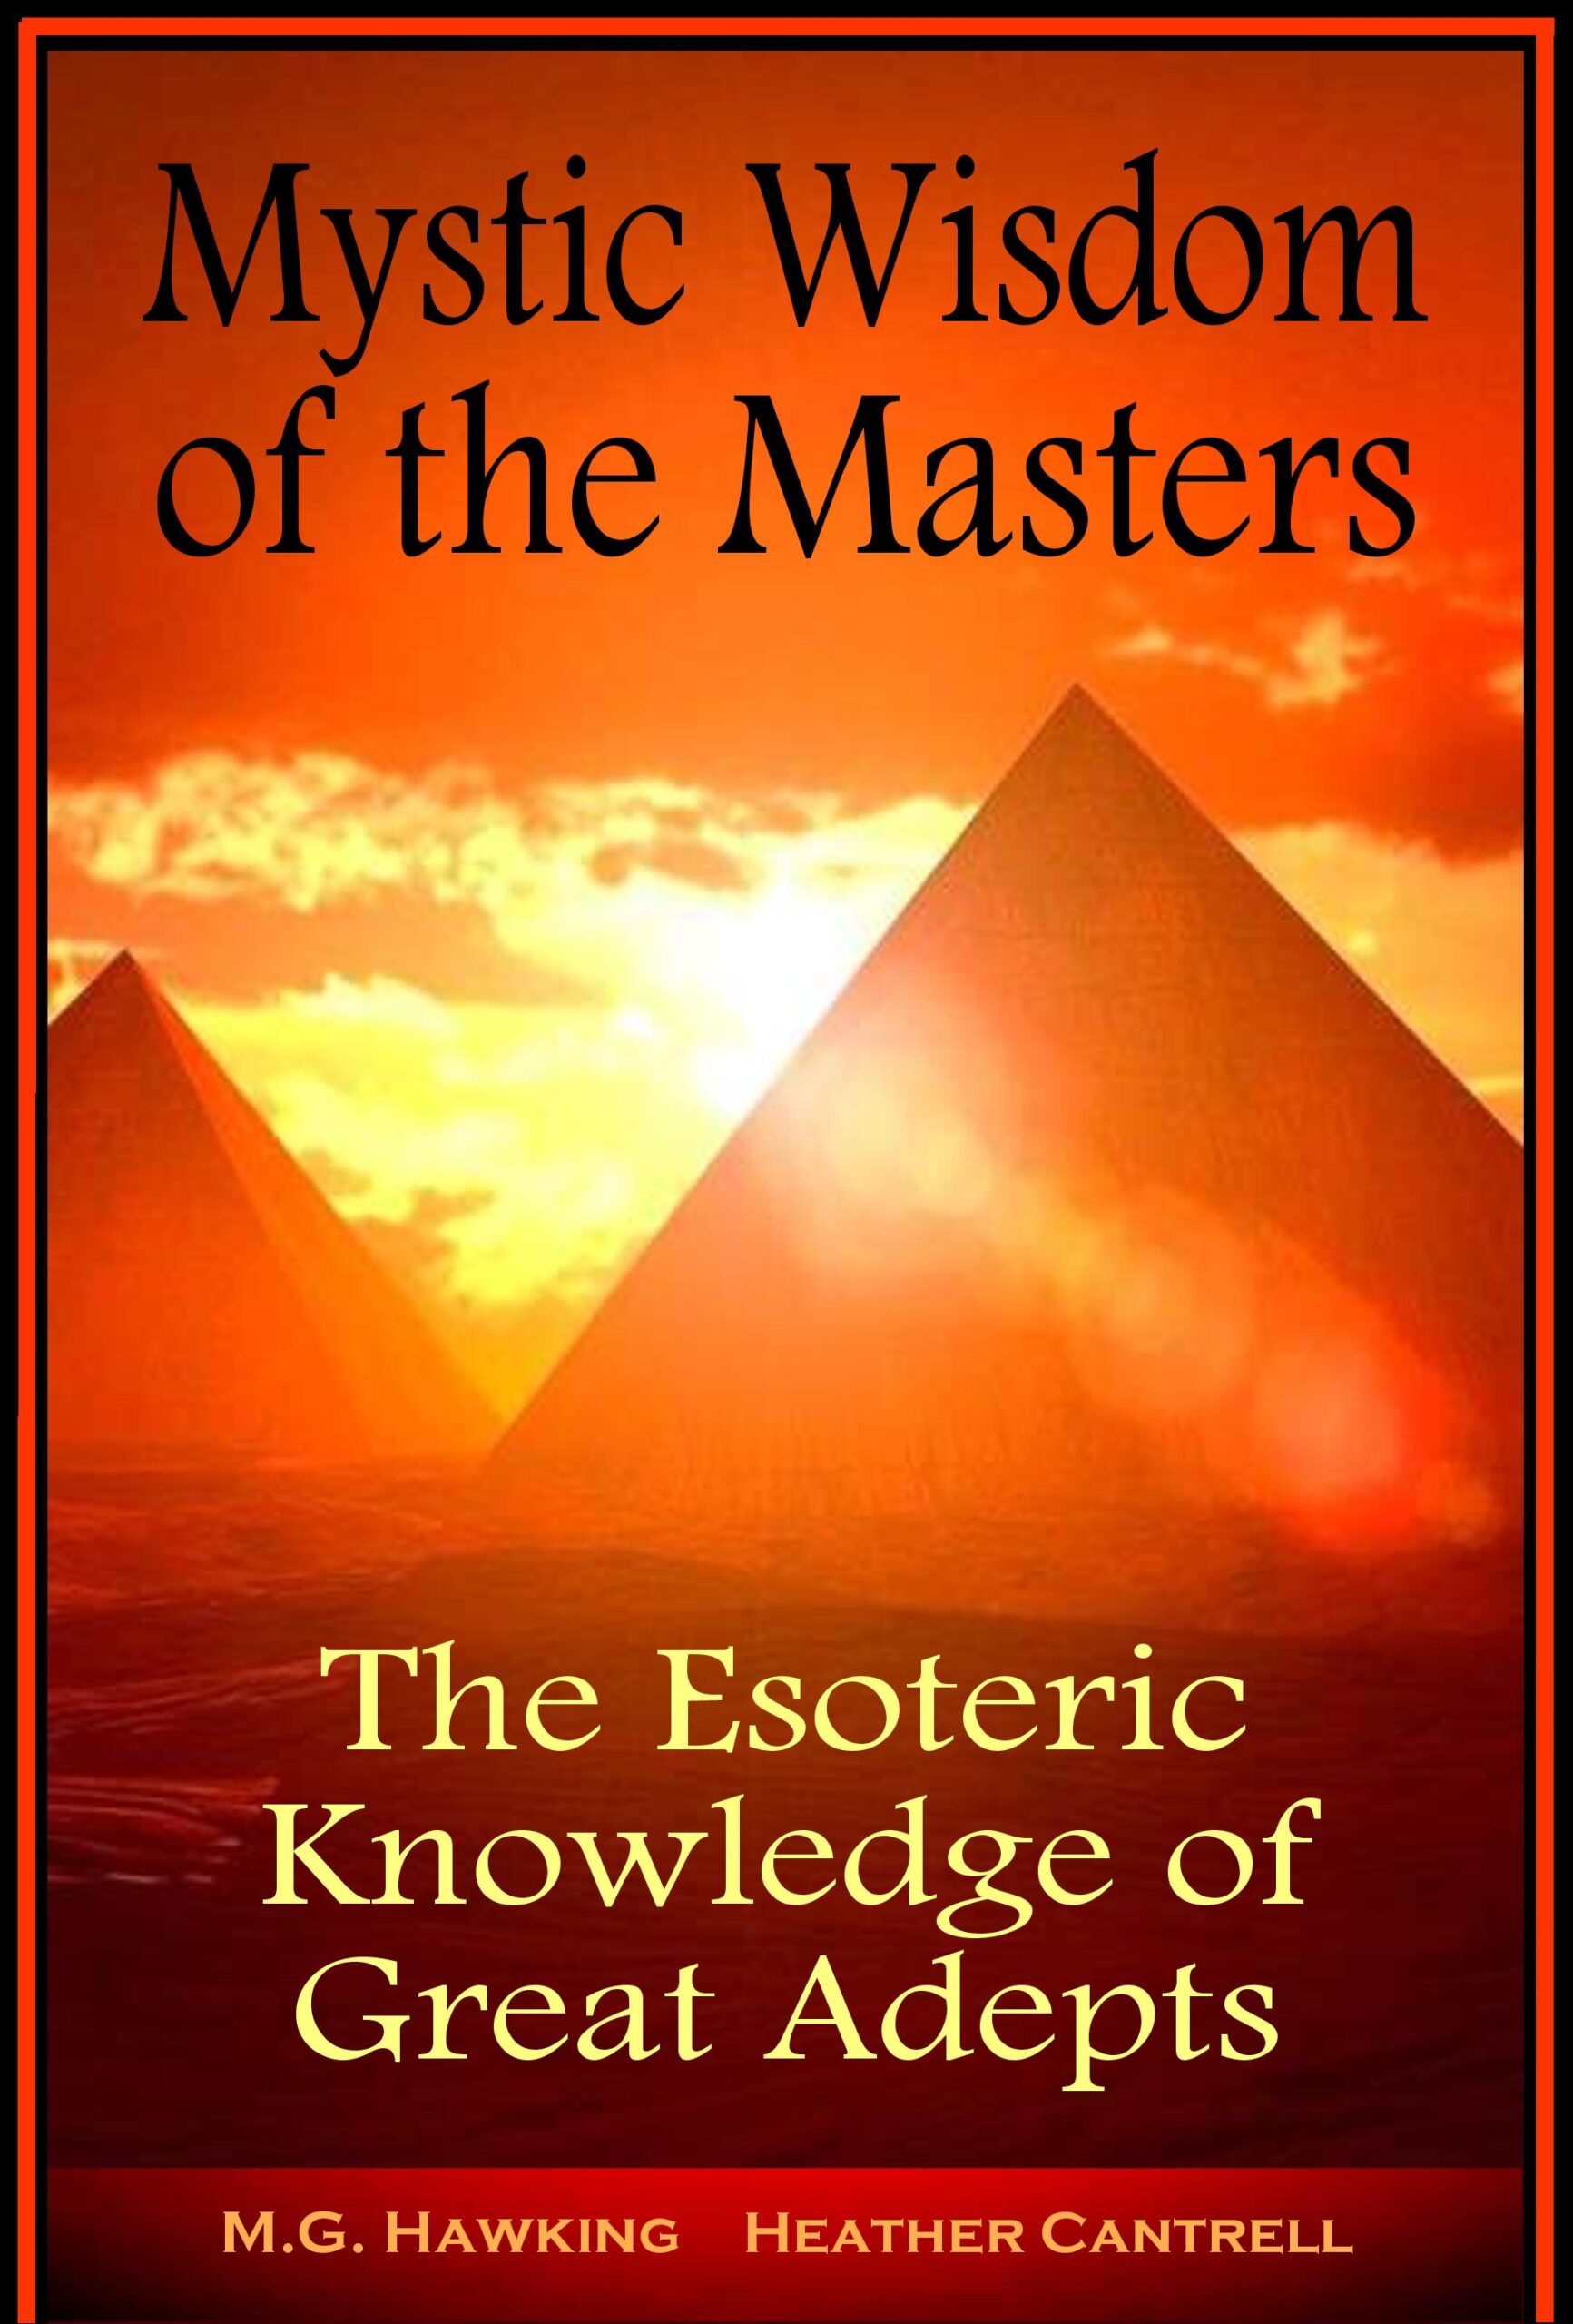 FREE: Mystic Wisdom of the Masters, The Esoteric Knowledge of Great Adepts by M.G. Hawking, Heather Cantrell